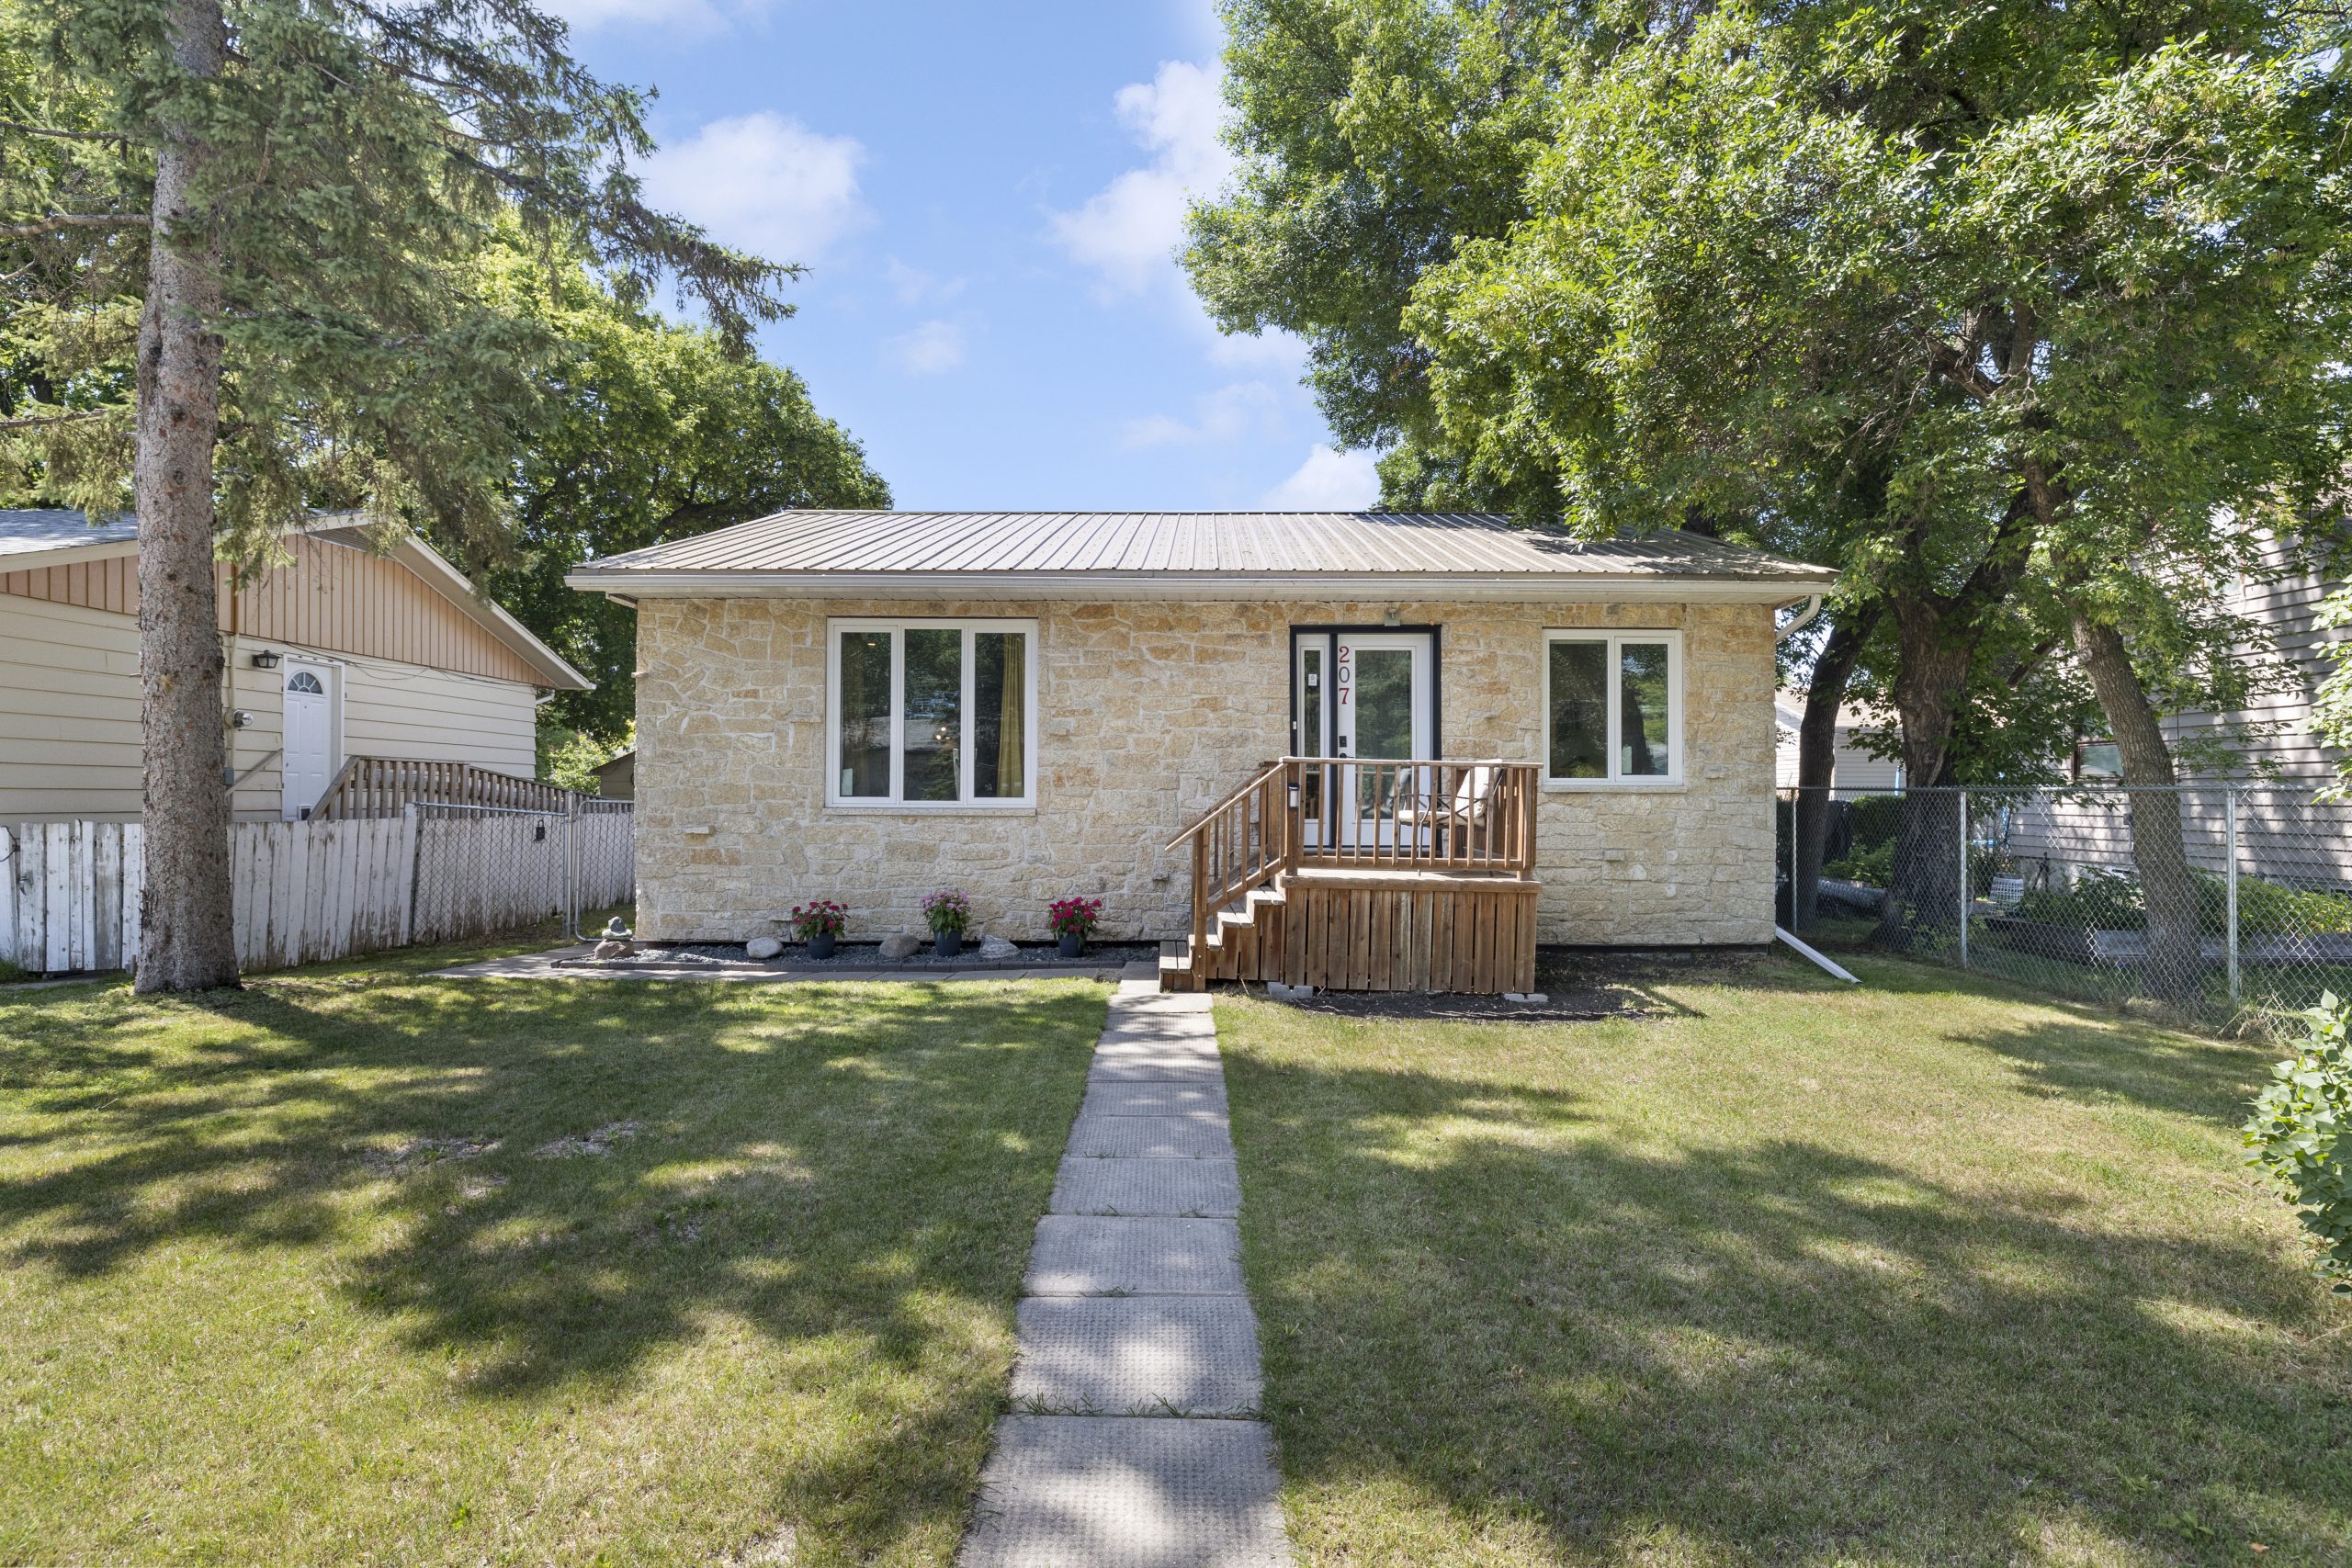 207 McFadden Ave – Your Dream Home Awaits in South Transcona